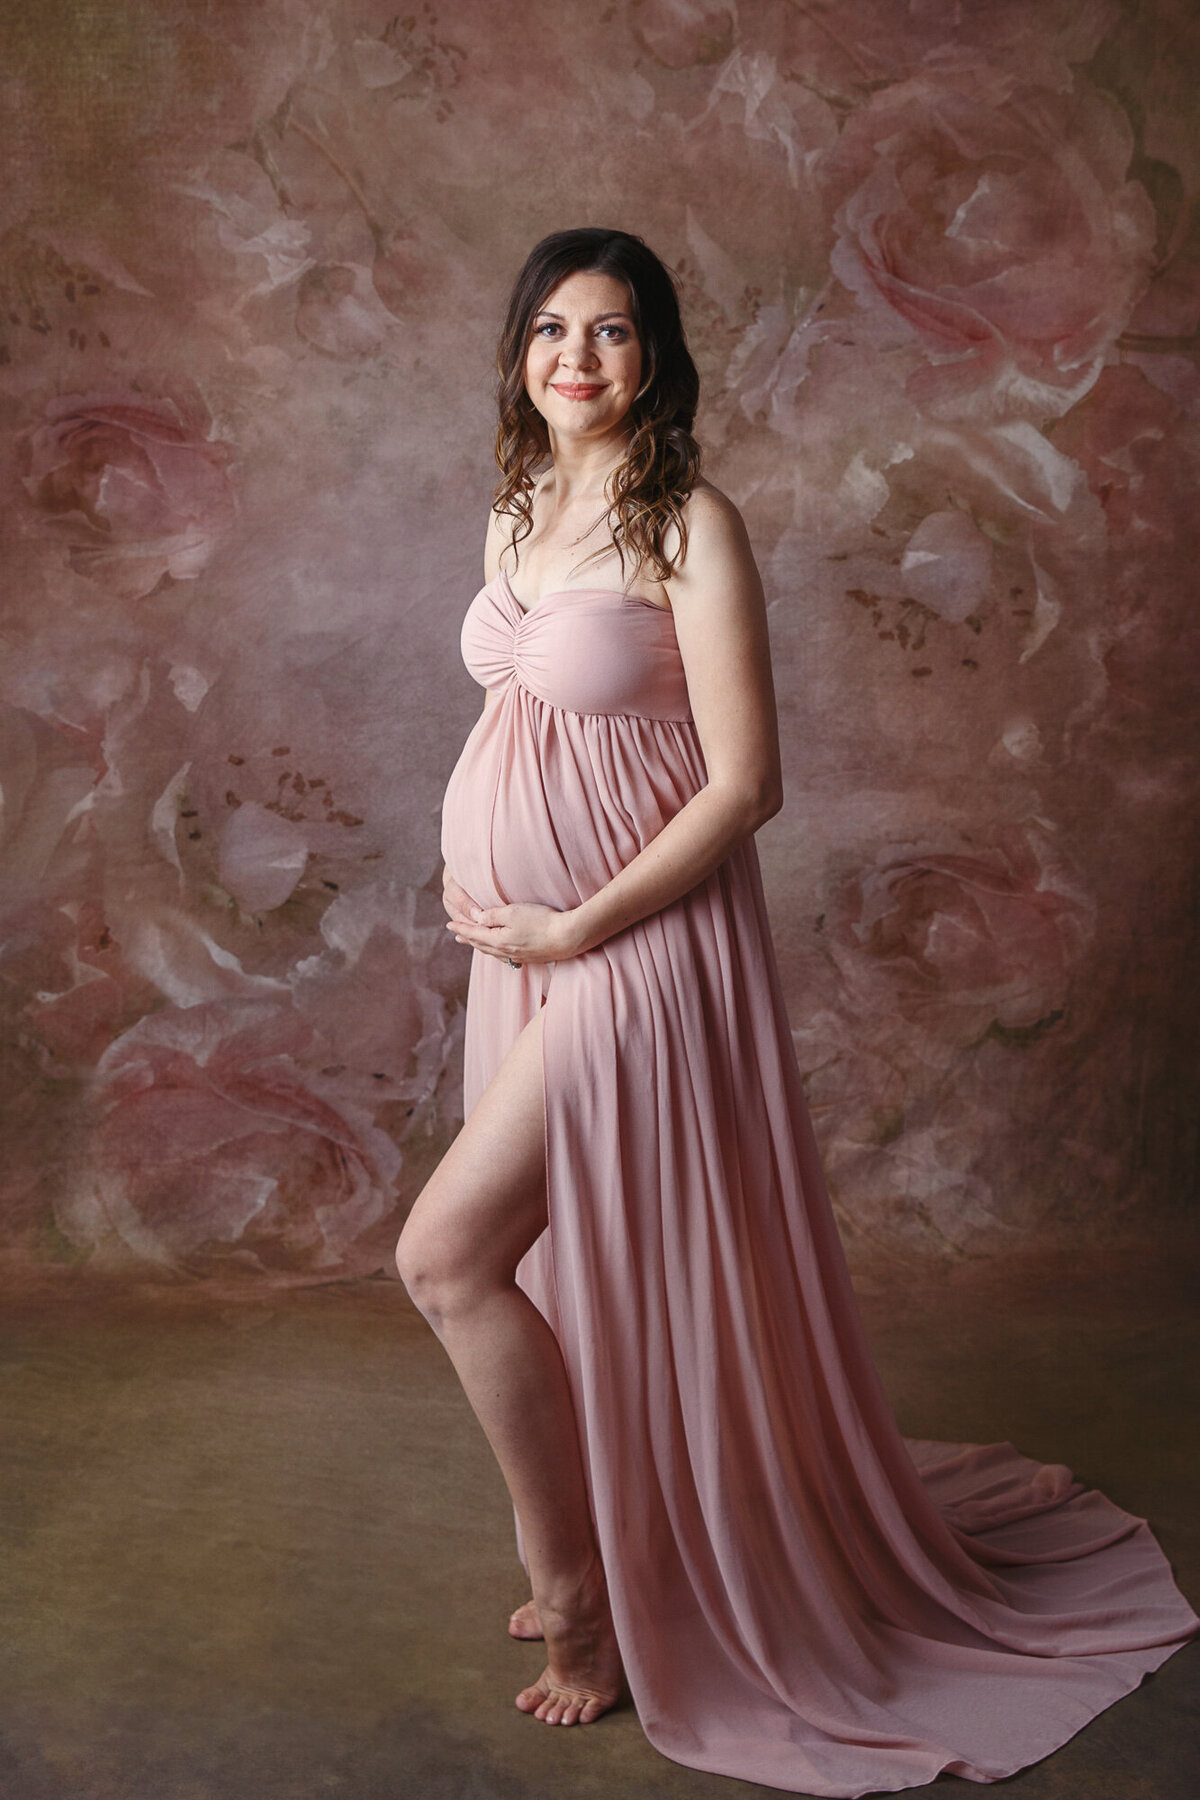 Pregnant woman standing with hands under her baby belly wearing a pink maternity gown on a floral pink and brown background